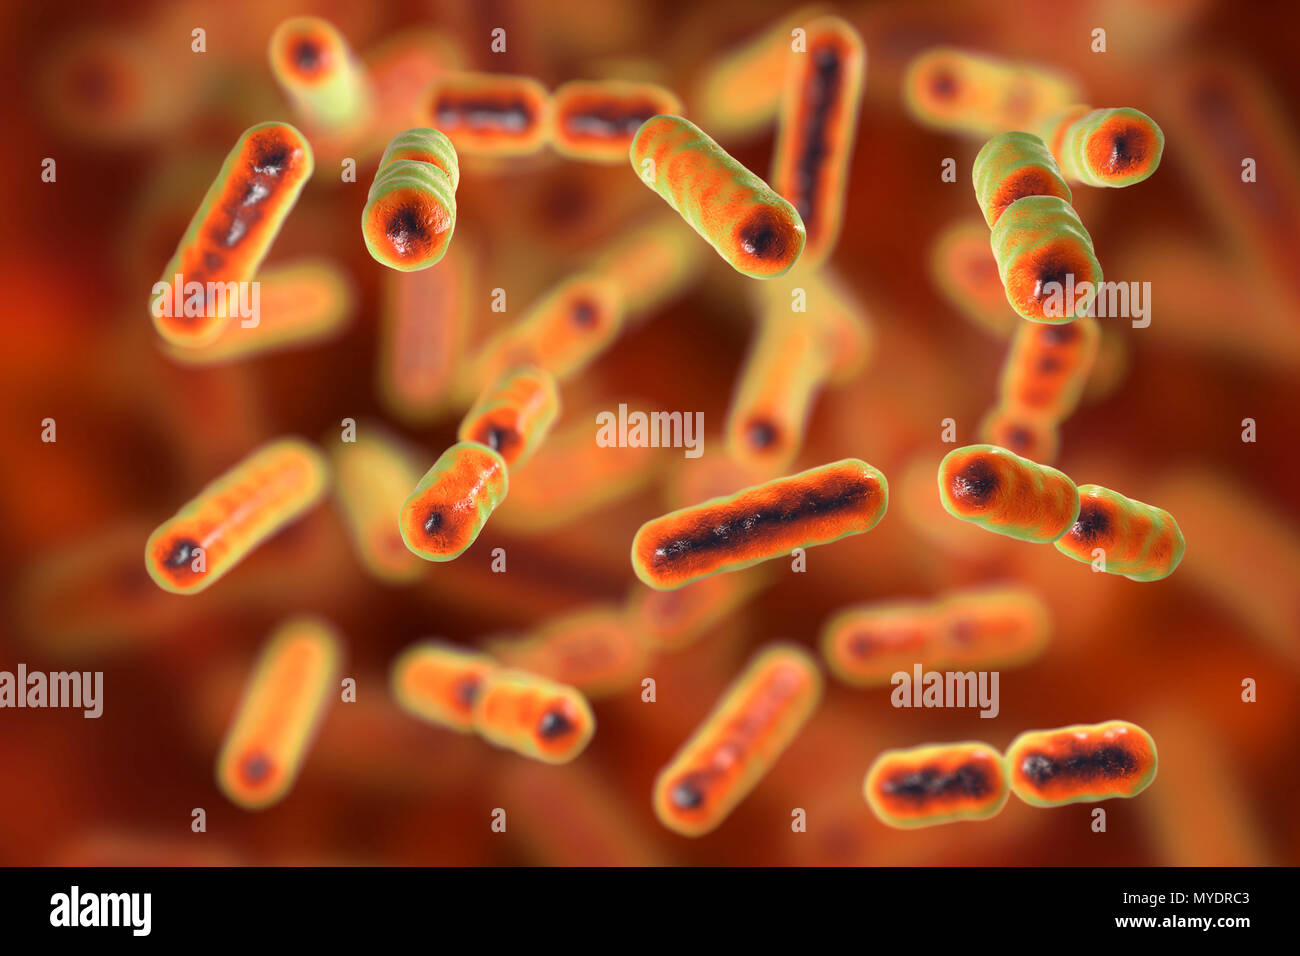 Computer illustration of Bacteroides sp. bacteria. These are rod shaped, obligate anaerobic, Gram-negative, saccharolytic bacteria. Bacteroides are the most common bacteria found in the human intestinal tract. They are involved in many important metabolic activities in the human flora of the colon, including fermentation of carbohydrates, utilization of nitrogenous substances, and biotransformation of bile acids and other steroids. When Bacteroides escape the colon, they are responsible for many types of infections and abscesses that can occur all over the body including the upper body, Stock Photo